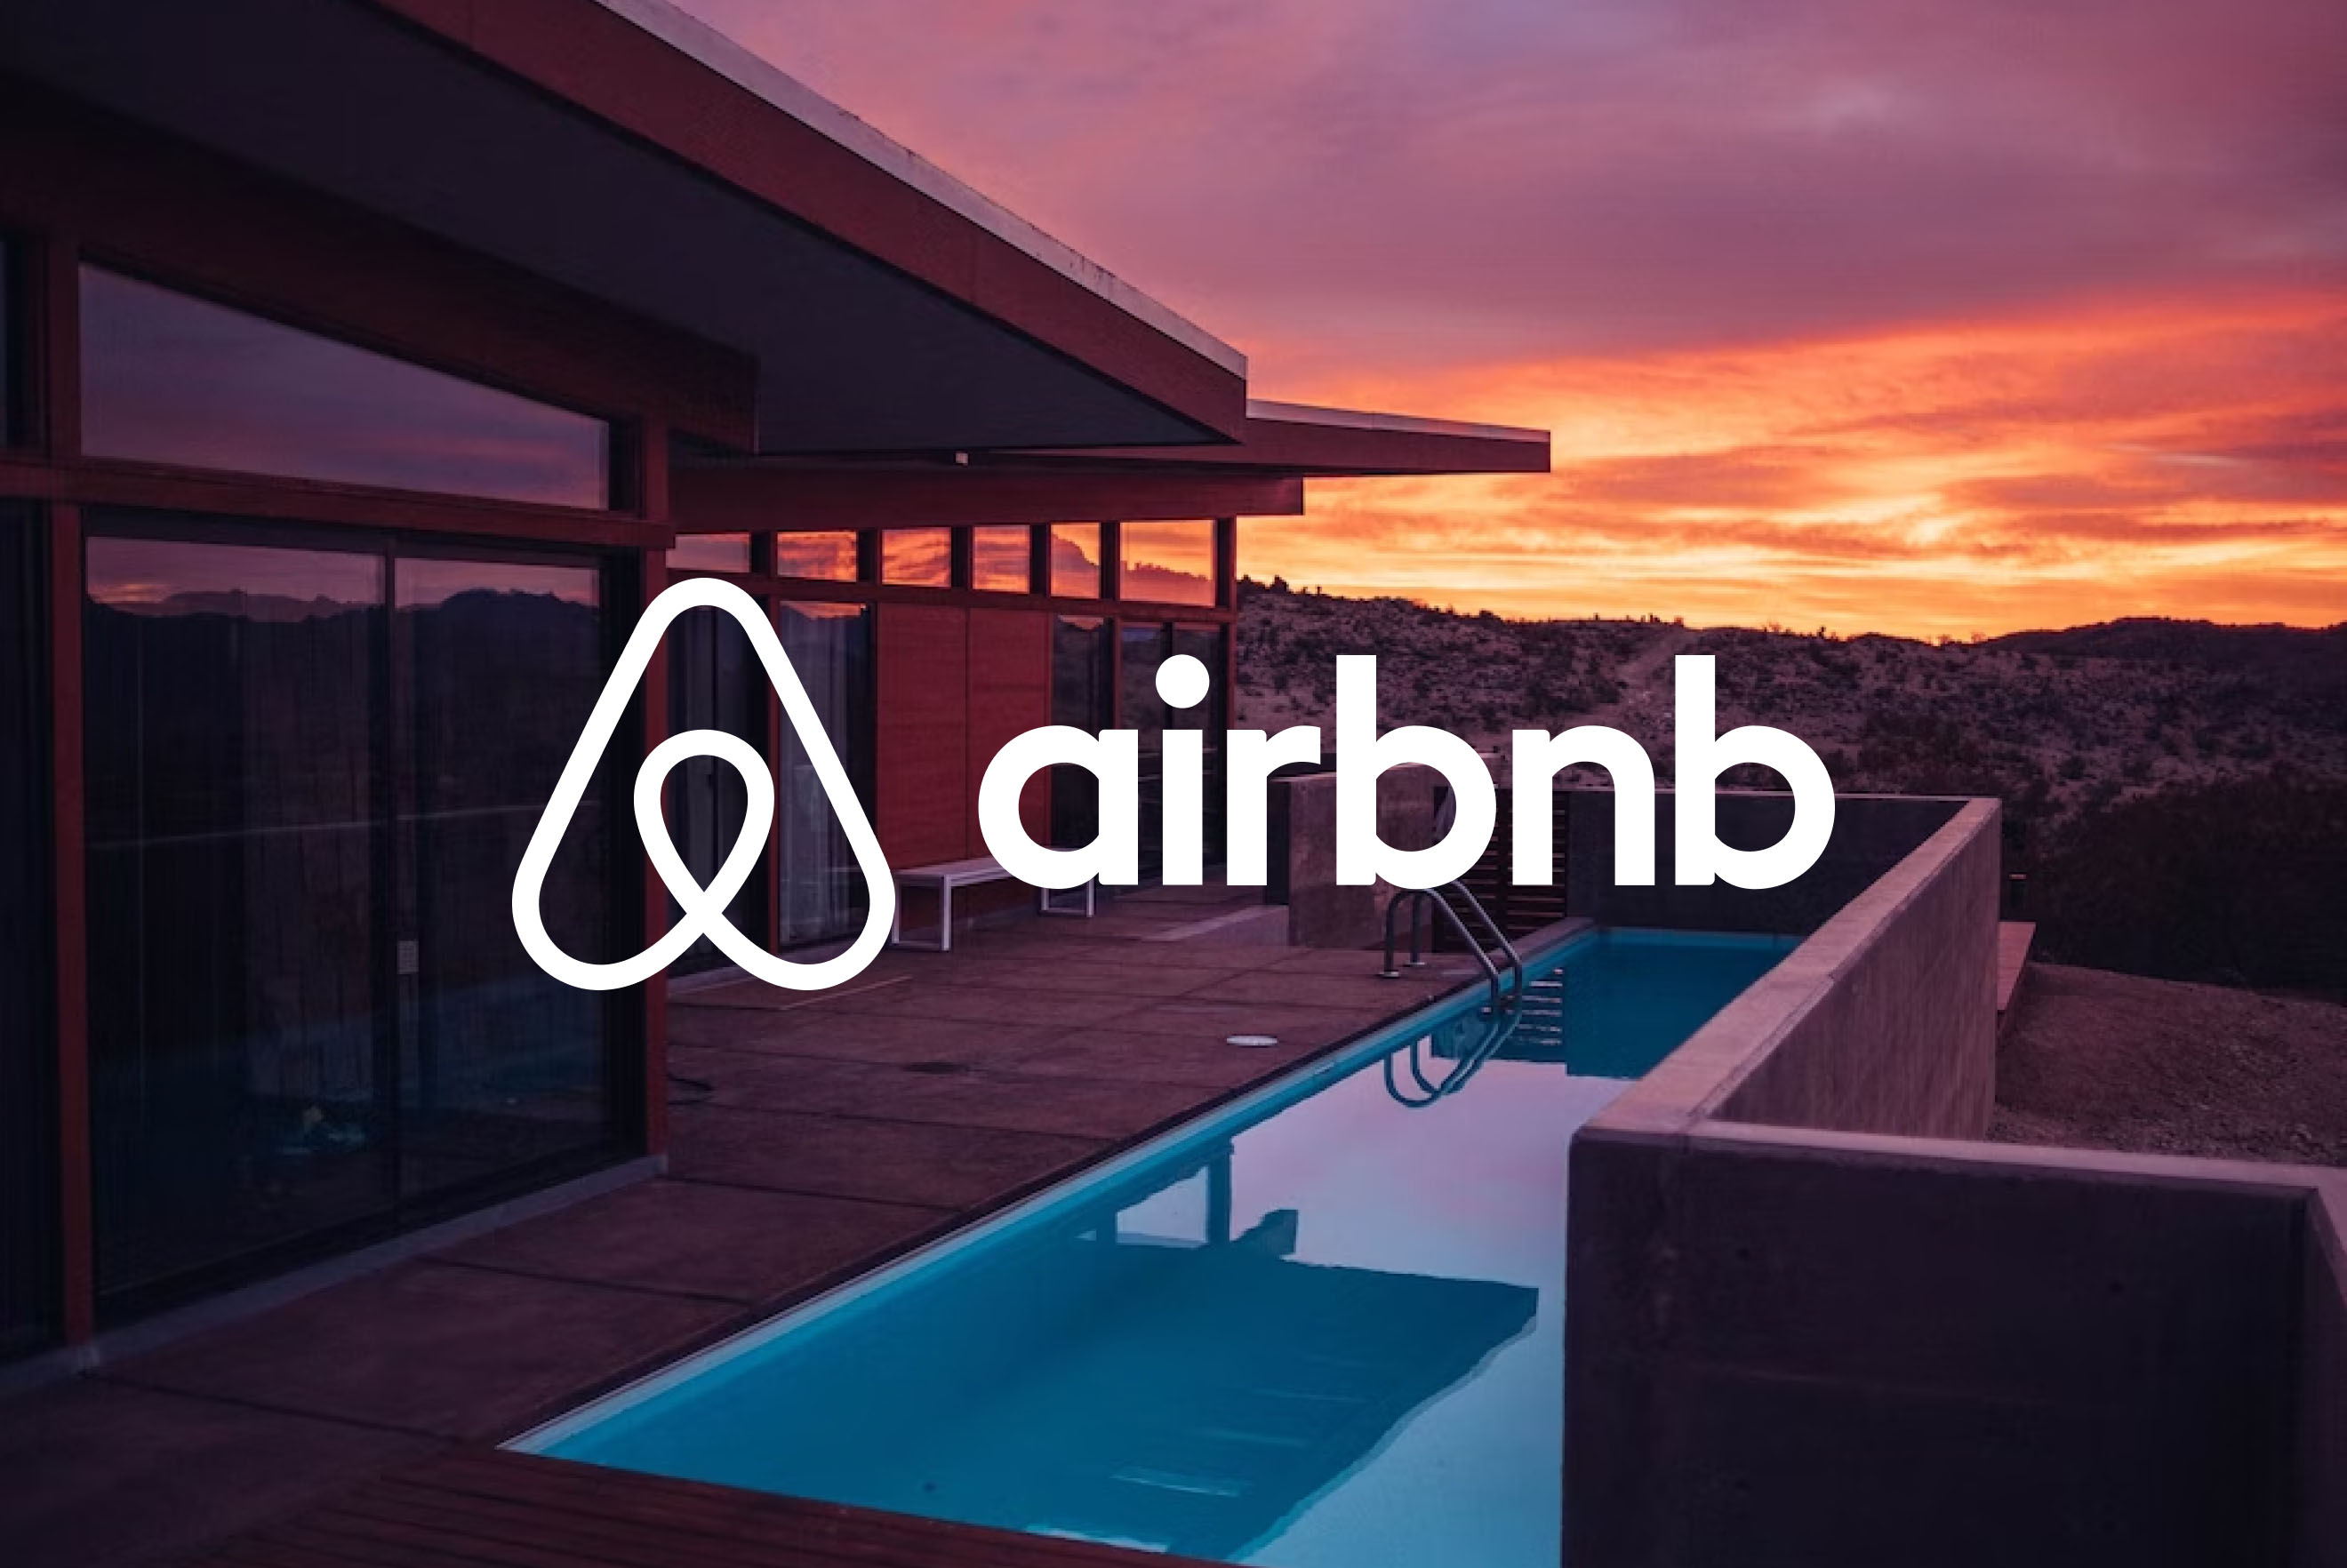 What You Can Learn from Airbnb’s Successful Startup